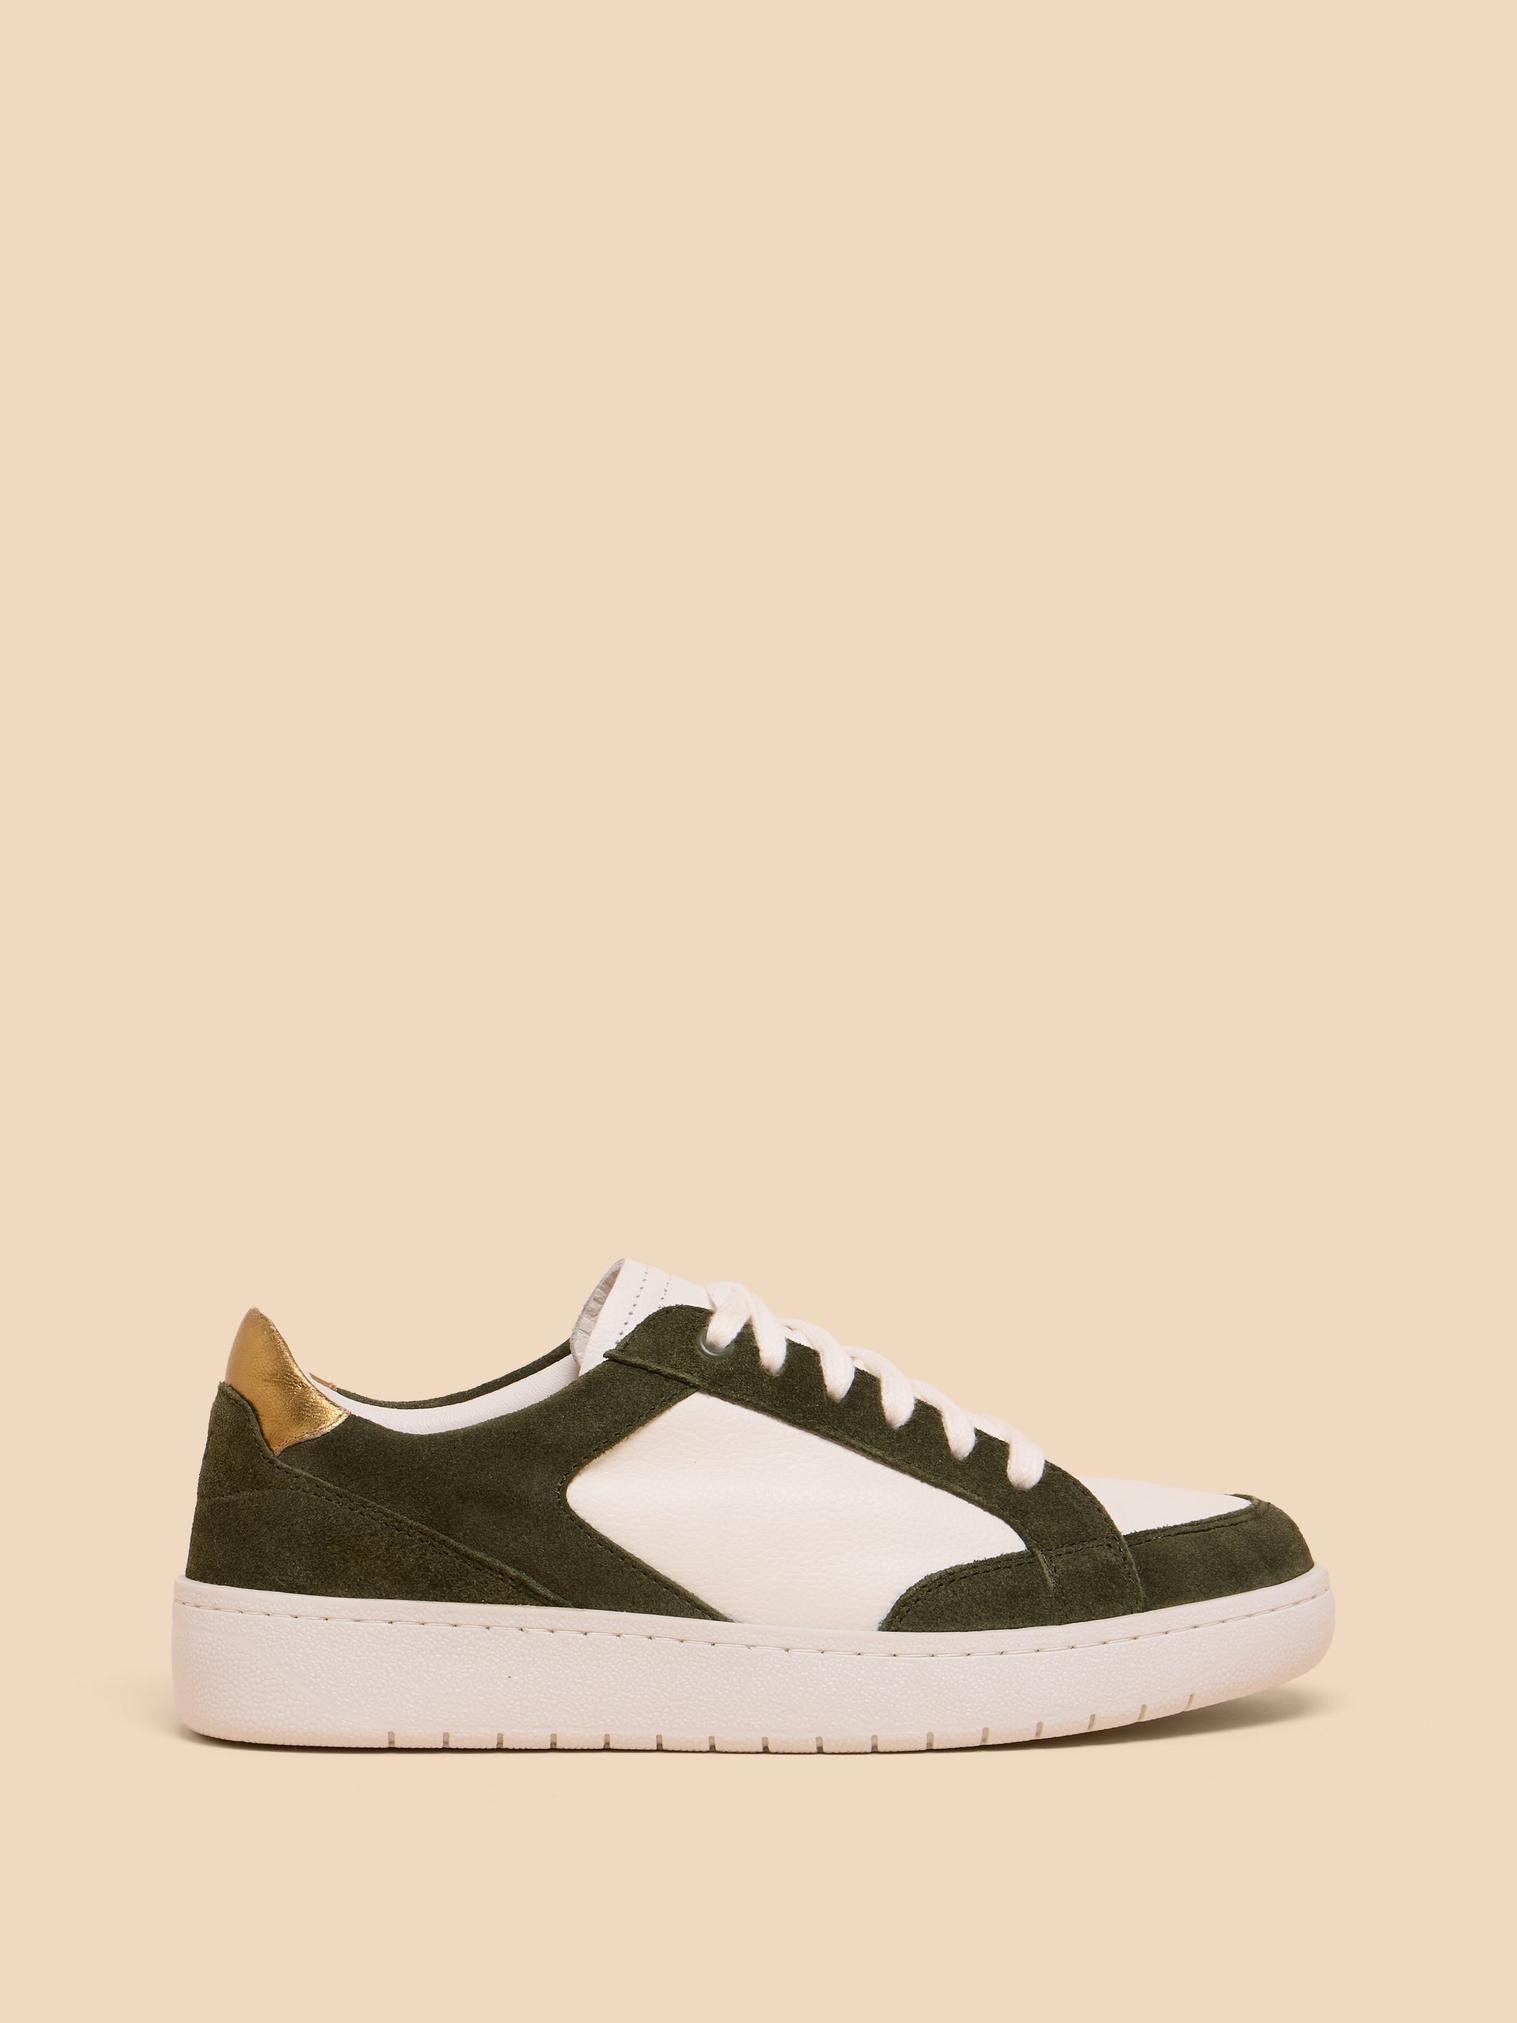 Dahlia Leather Trainer in GREEN MLT - LIFESTYLE